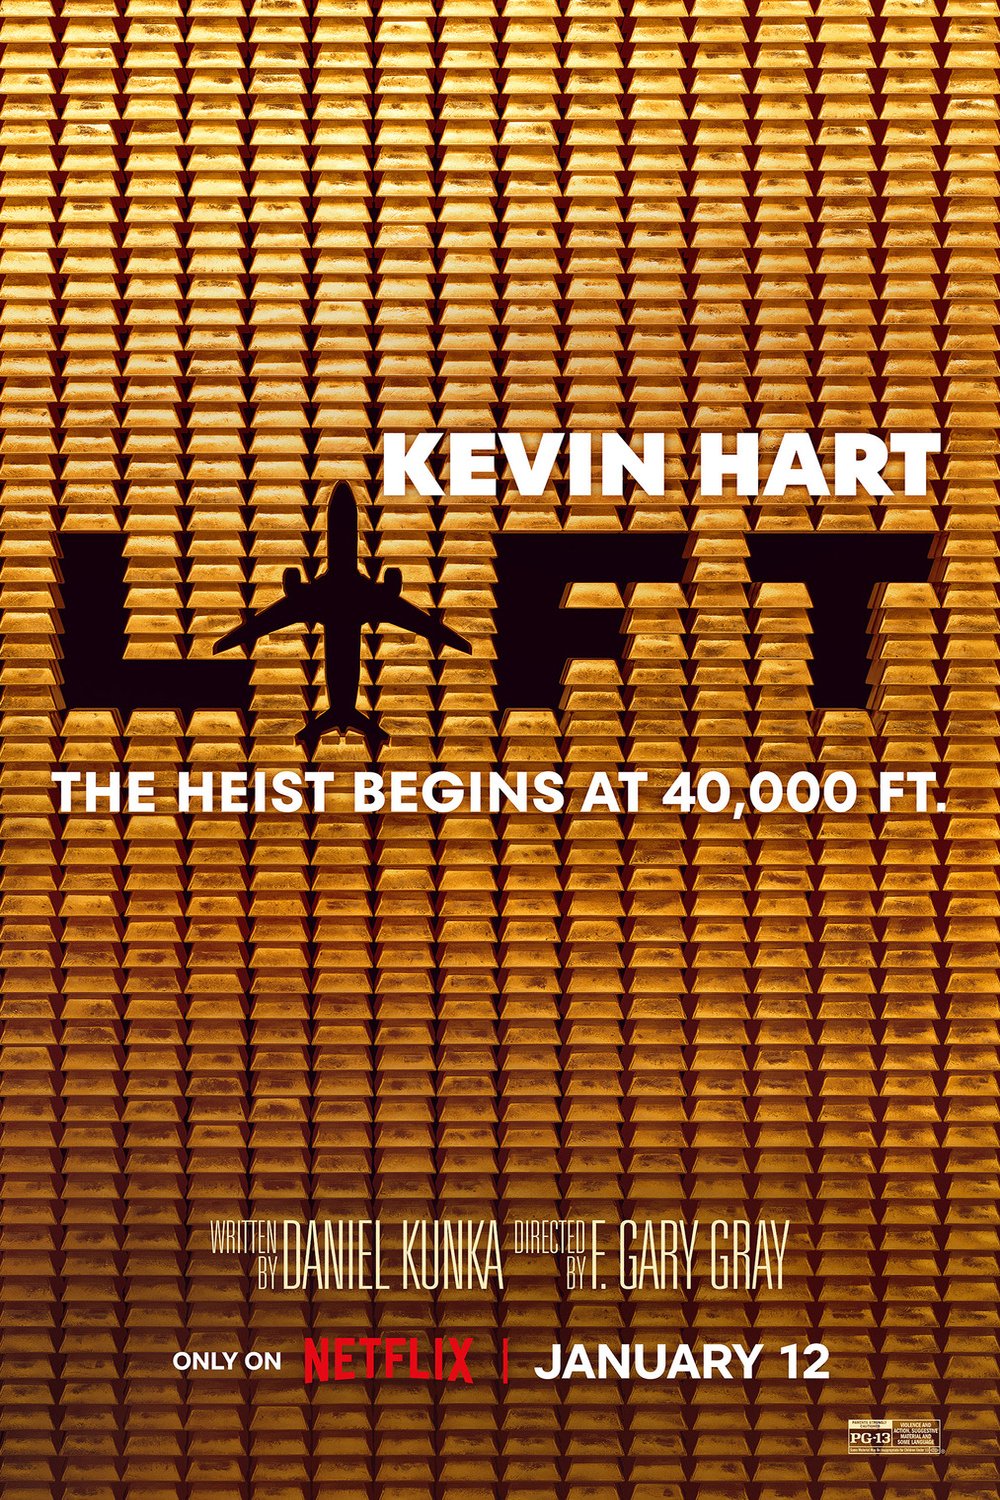 Poster of the movie Lift